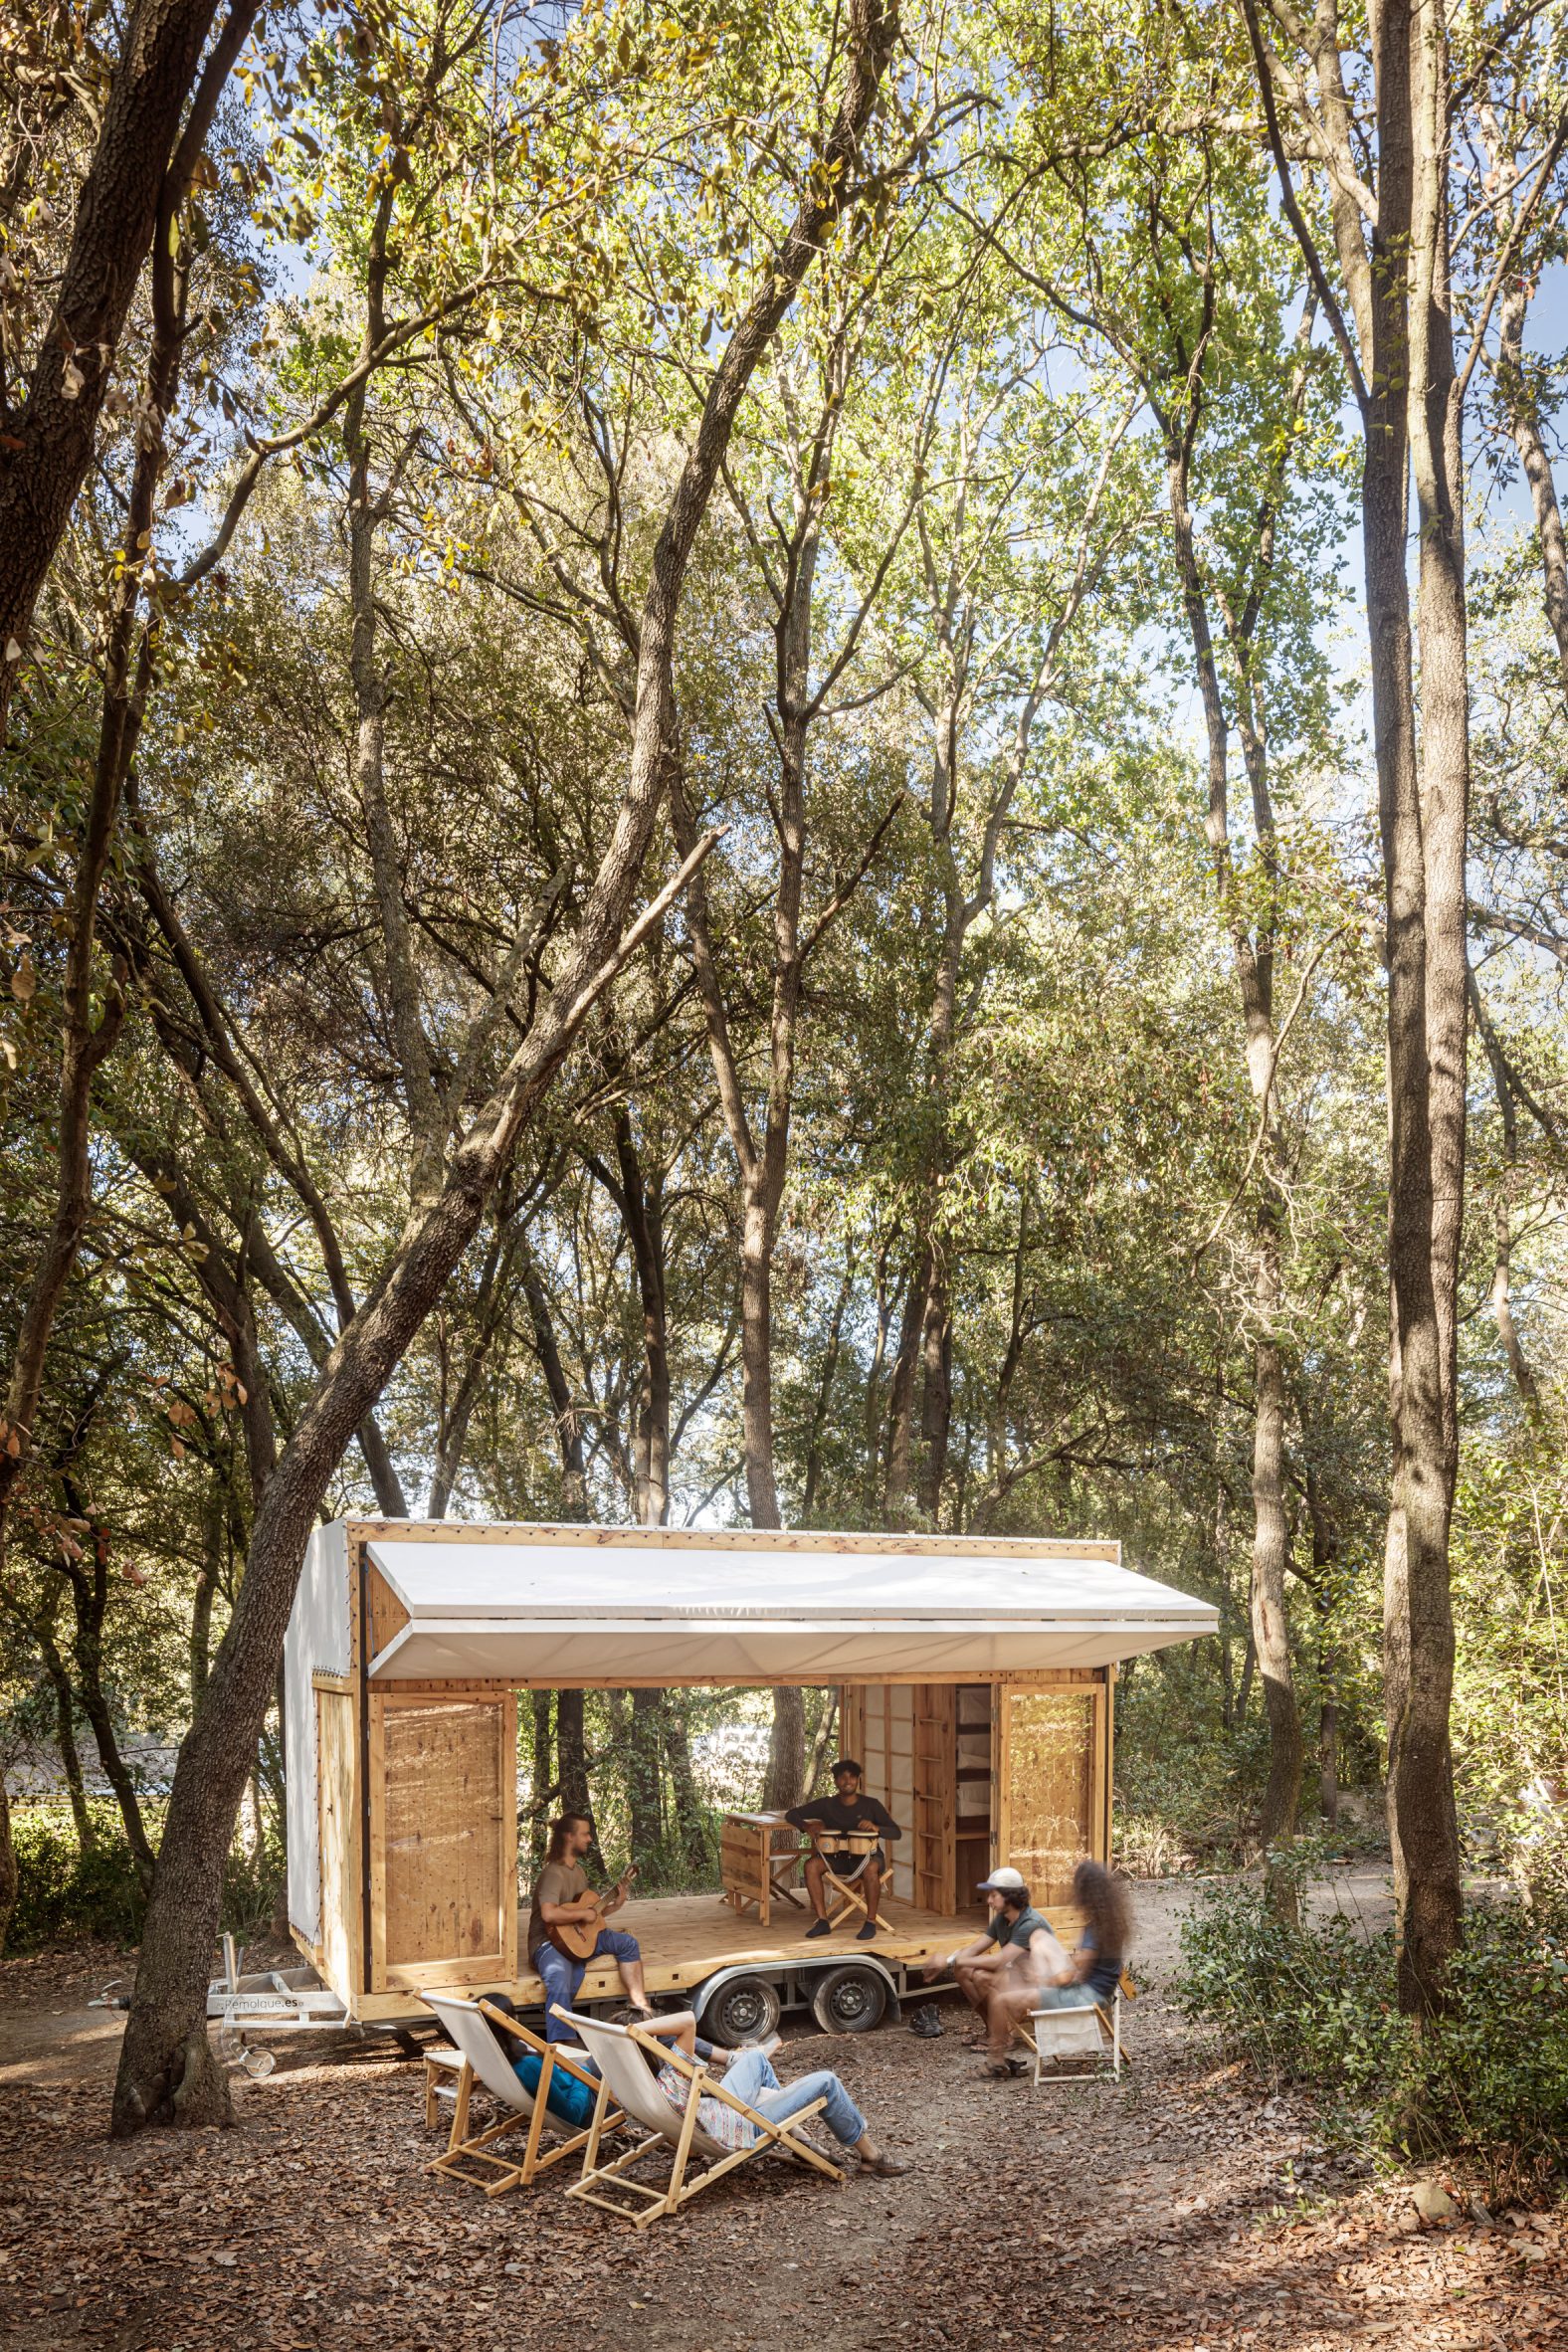 Mobile Moca dwelling by Institute for Advanced Architecture of Catalonia